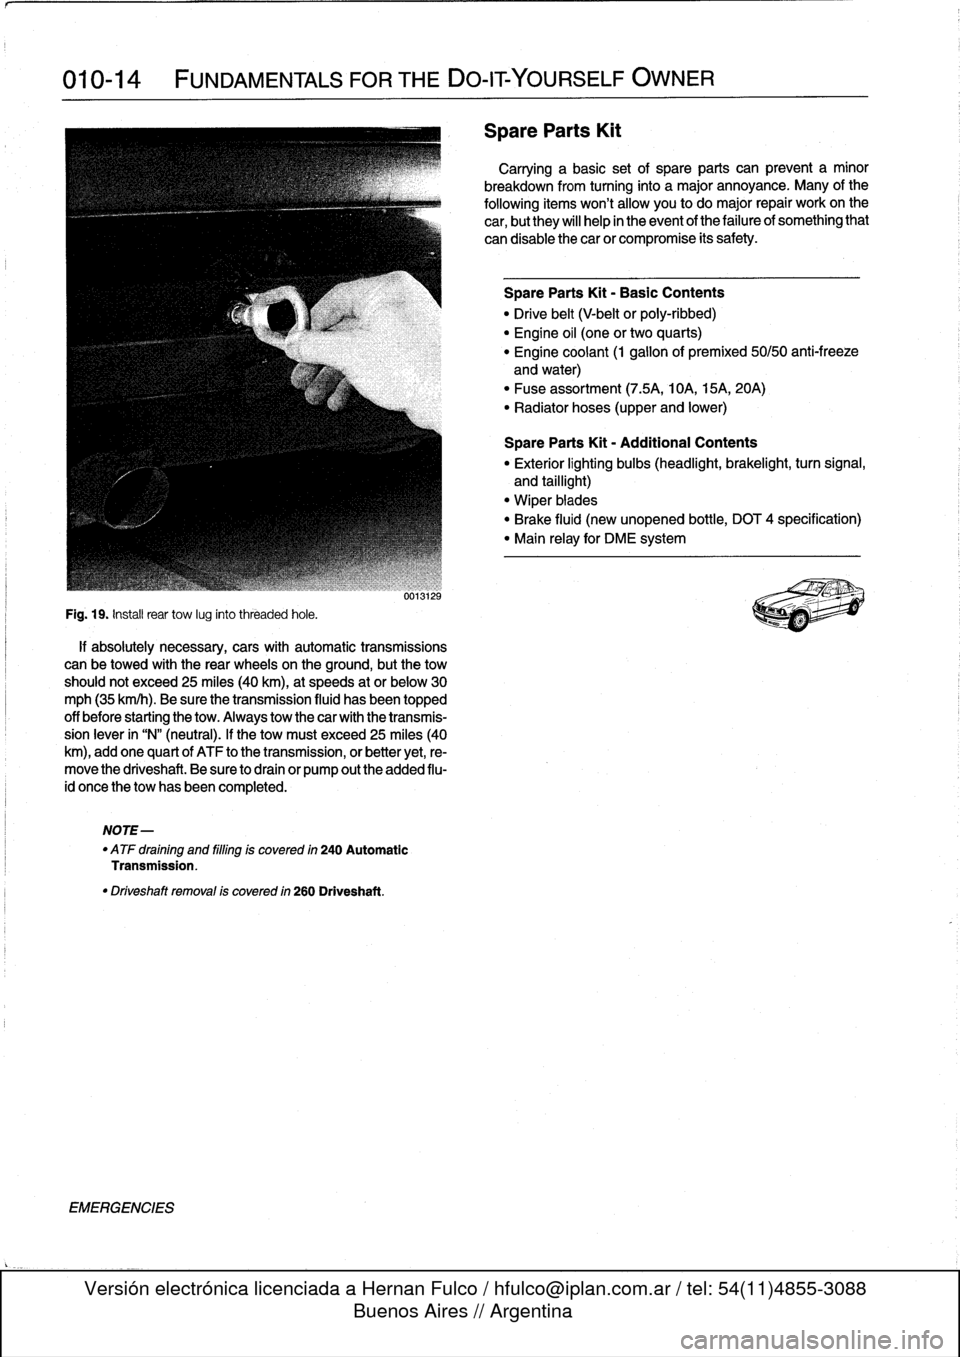 BMW 325i 1997 E36 Workshop Manual 
010-14

	

FUNDAMENTALS
FOR
THE
DO-ITYOURSELF
OWNER

Fig
.
19
.
Instaf
rear
tow
lug
into
threaded
hole
.

if
absolutely
necessary,
cars
with
automatic
transmissions
can
be
towed
with
the
rear
wheels
